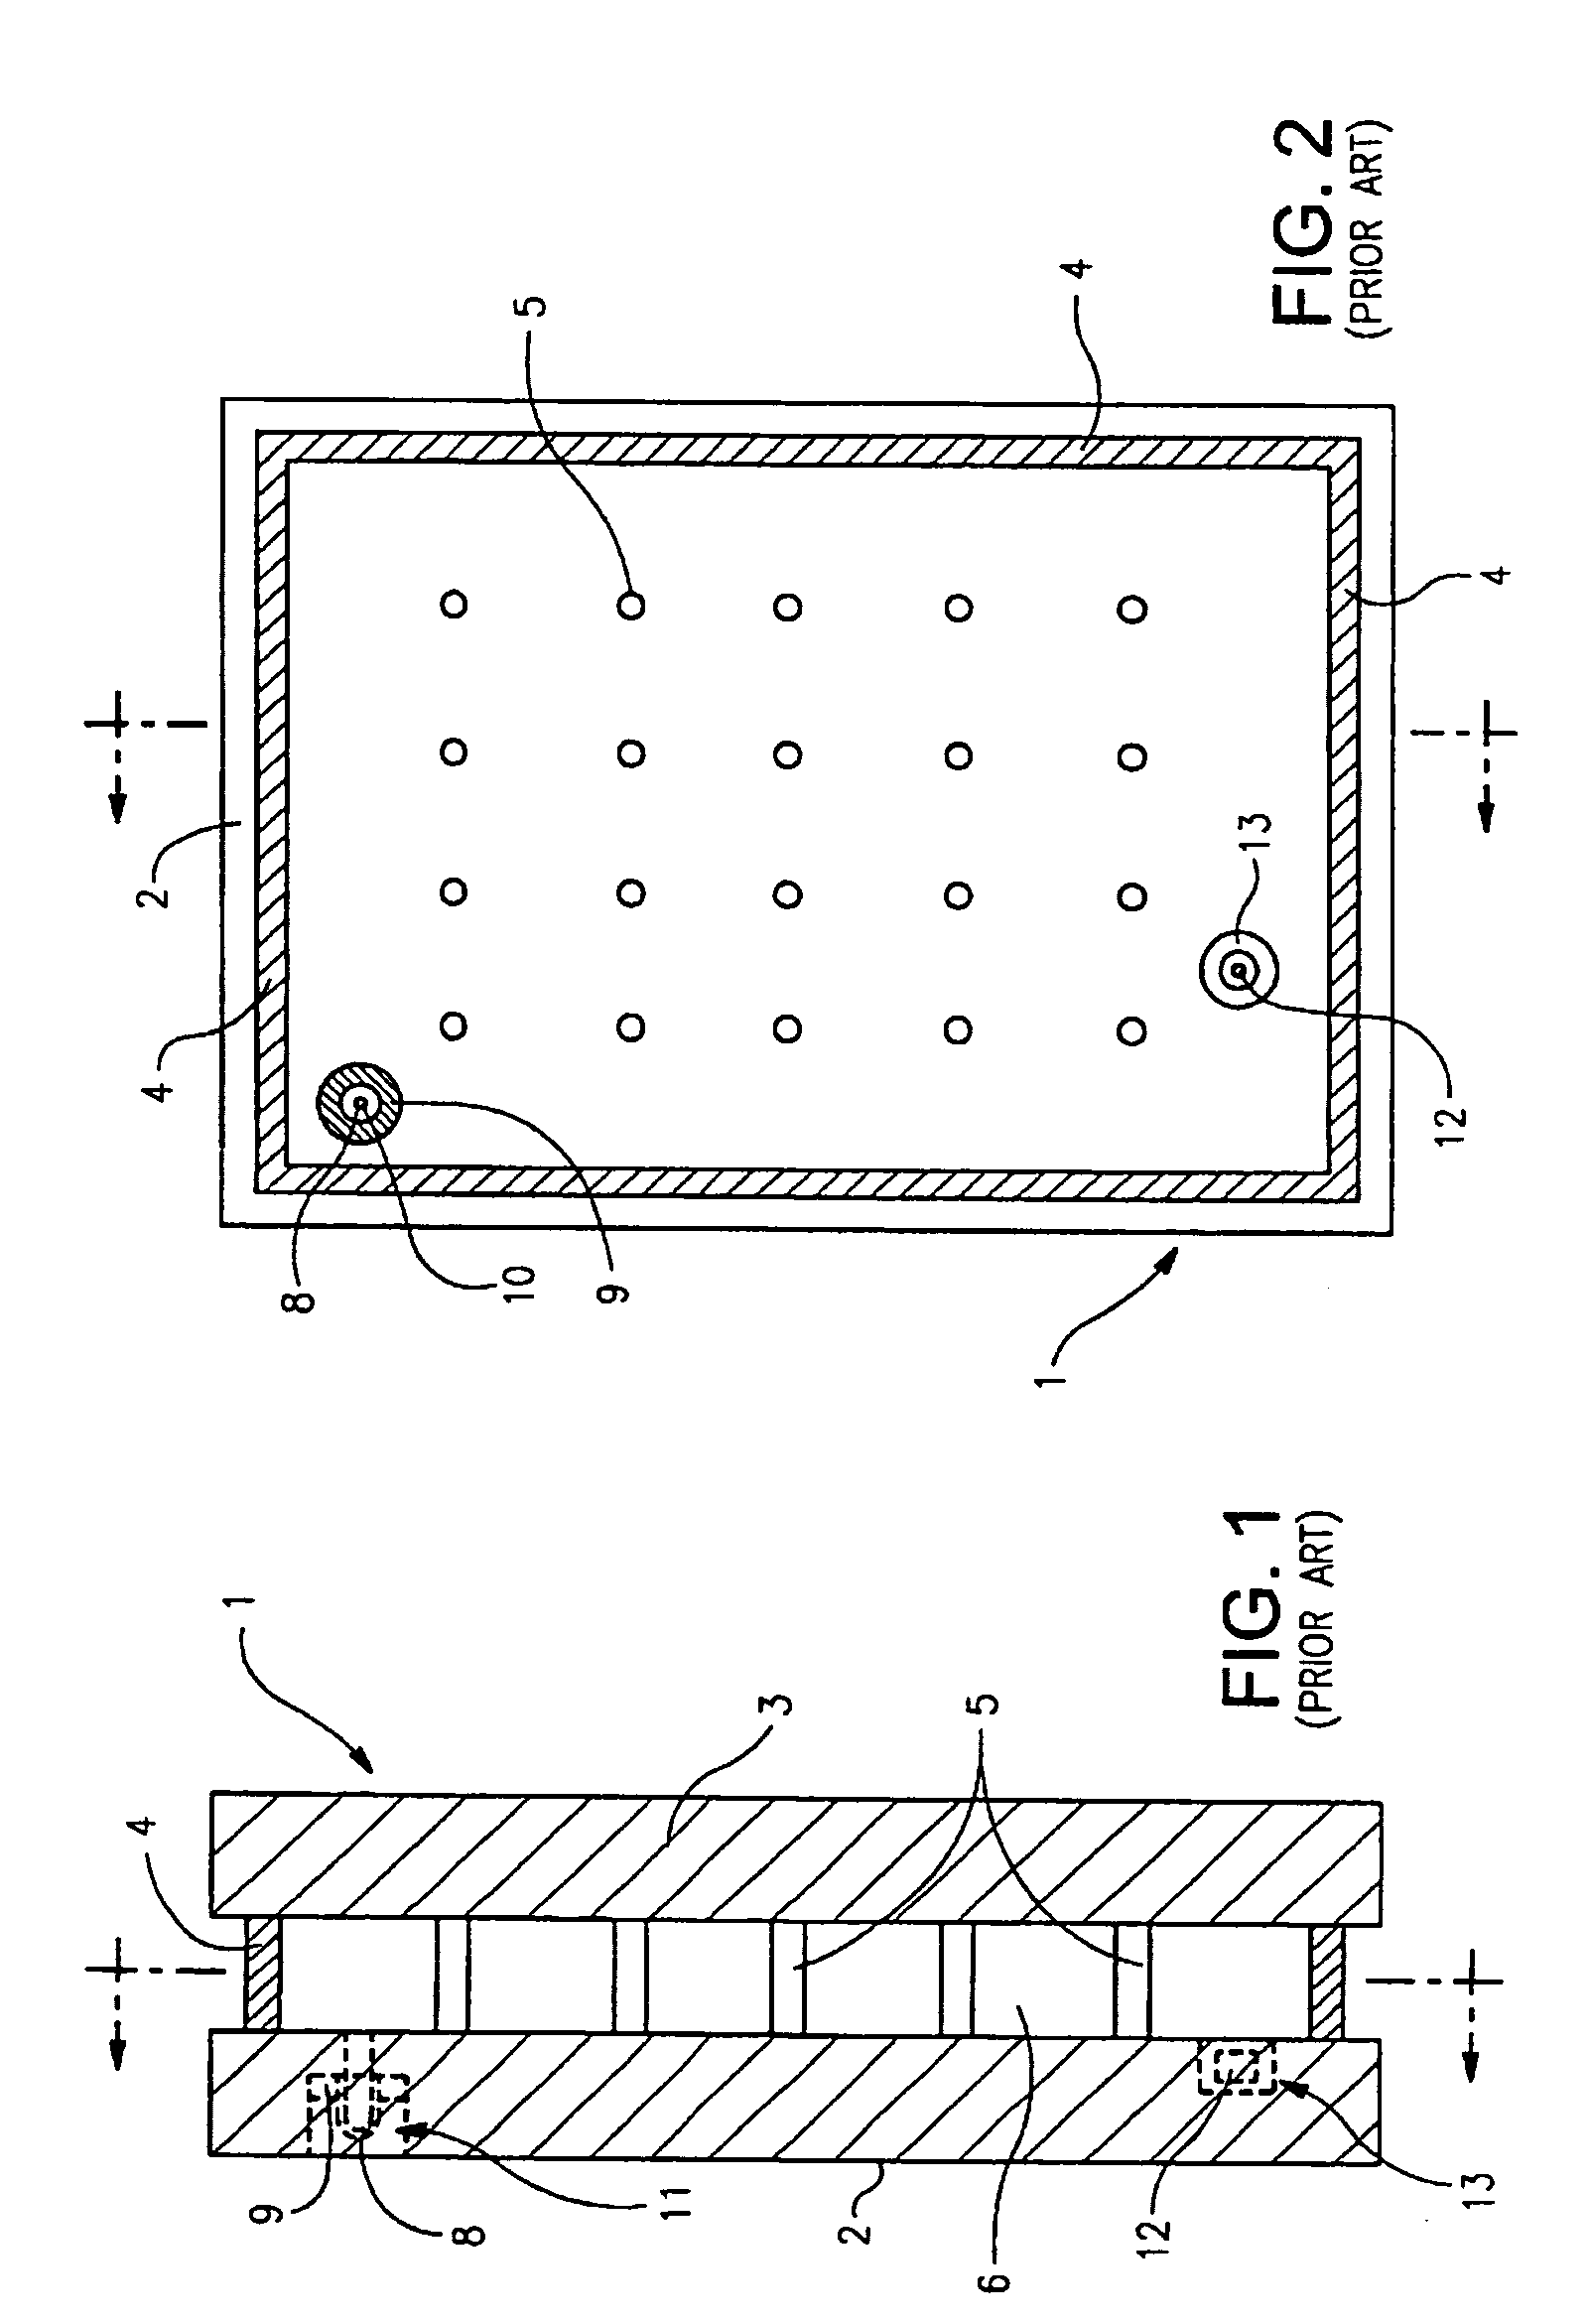 Non-toxic water-based frit slurry paste, and assembly incorporating the same